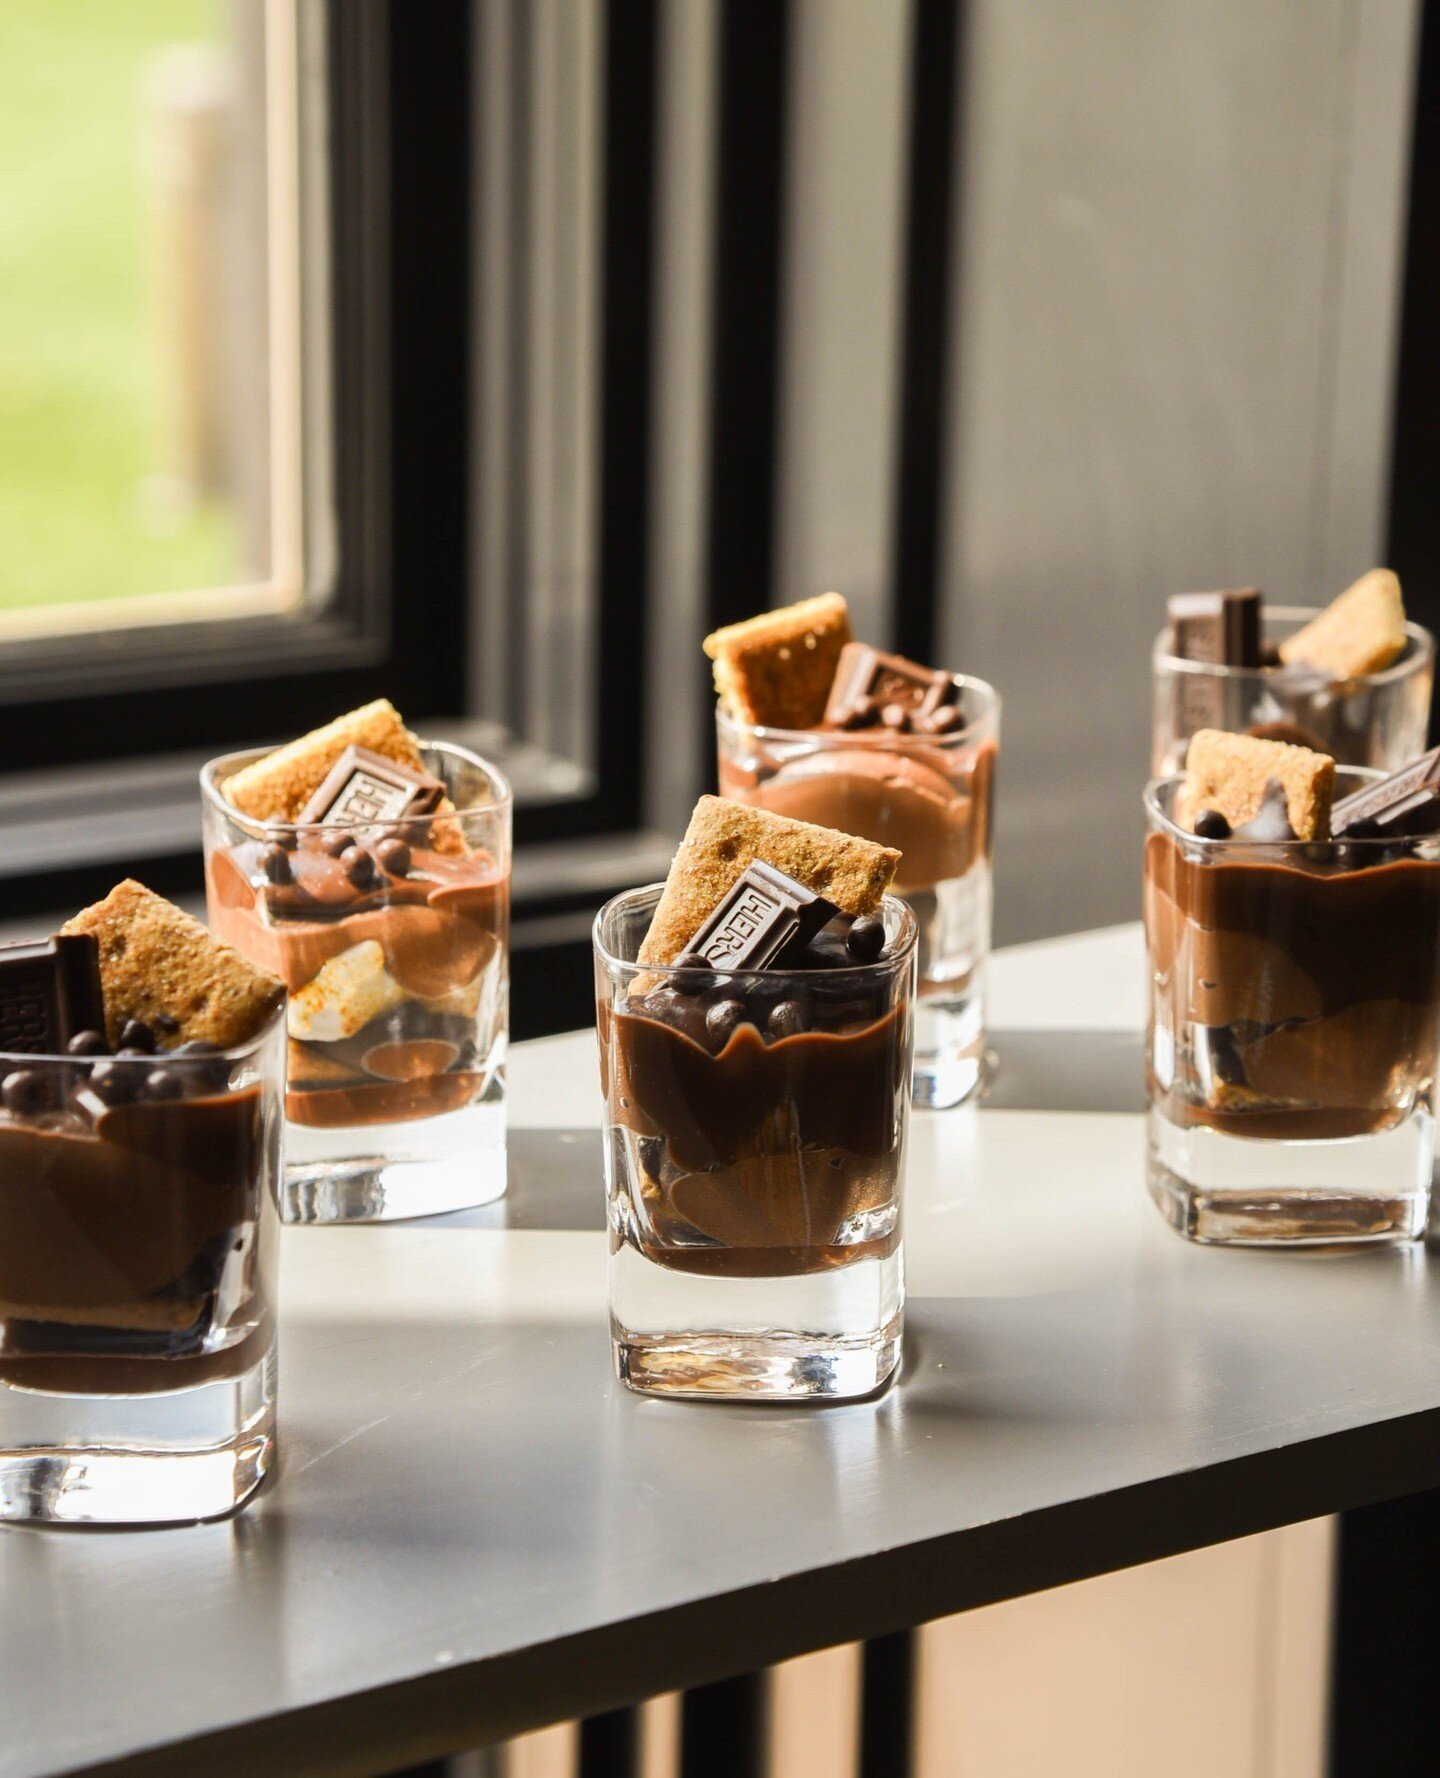 Dessert time, anyone? Our in-house pastry chefs create all types of dessert favorites for luncheons.